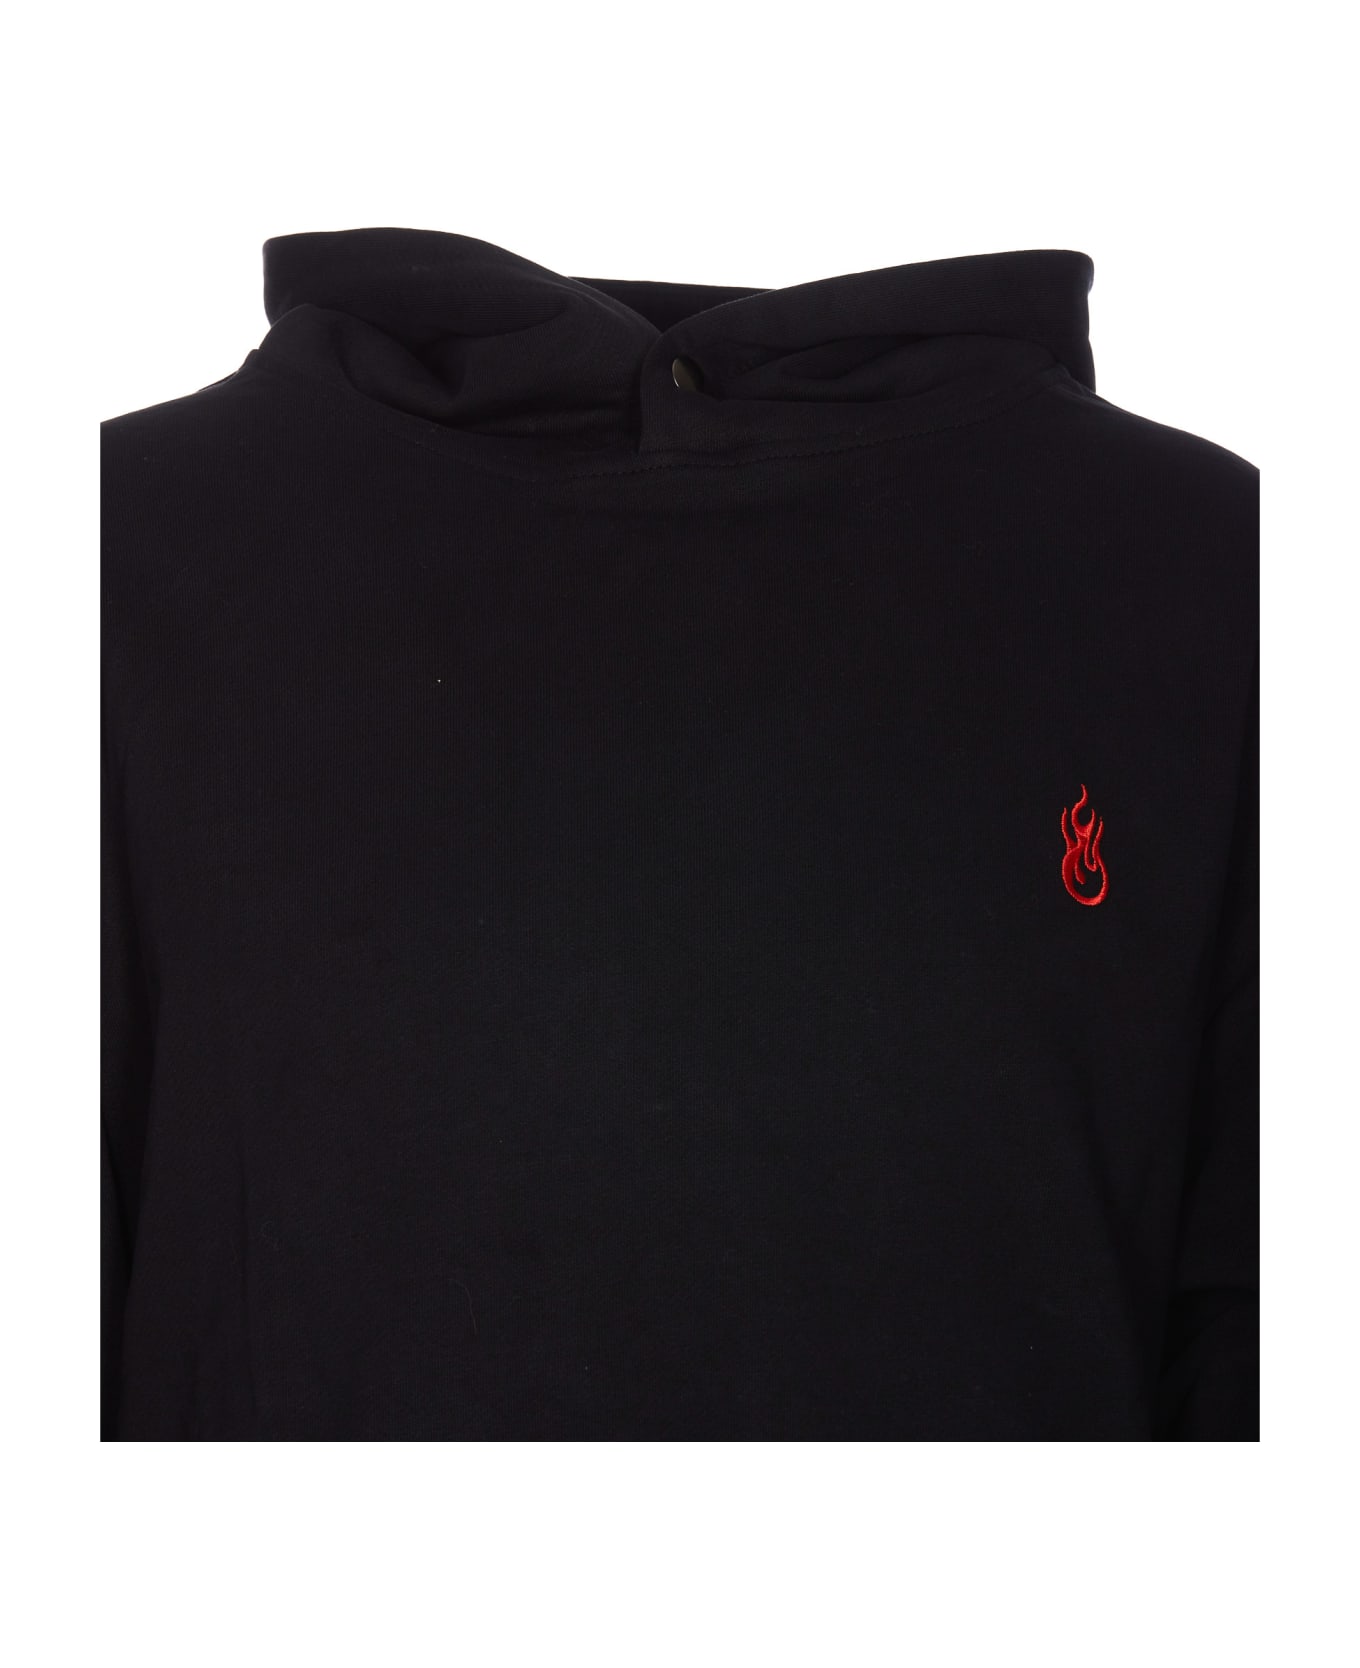 Vision of Super Hoodie With Flames Logo - BLACK